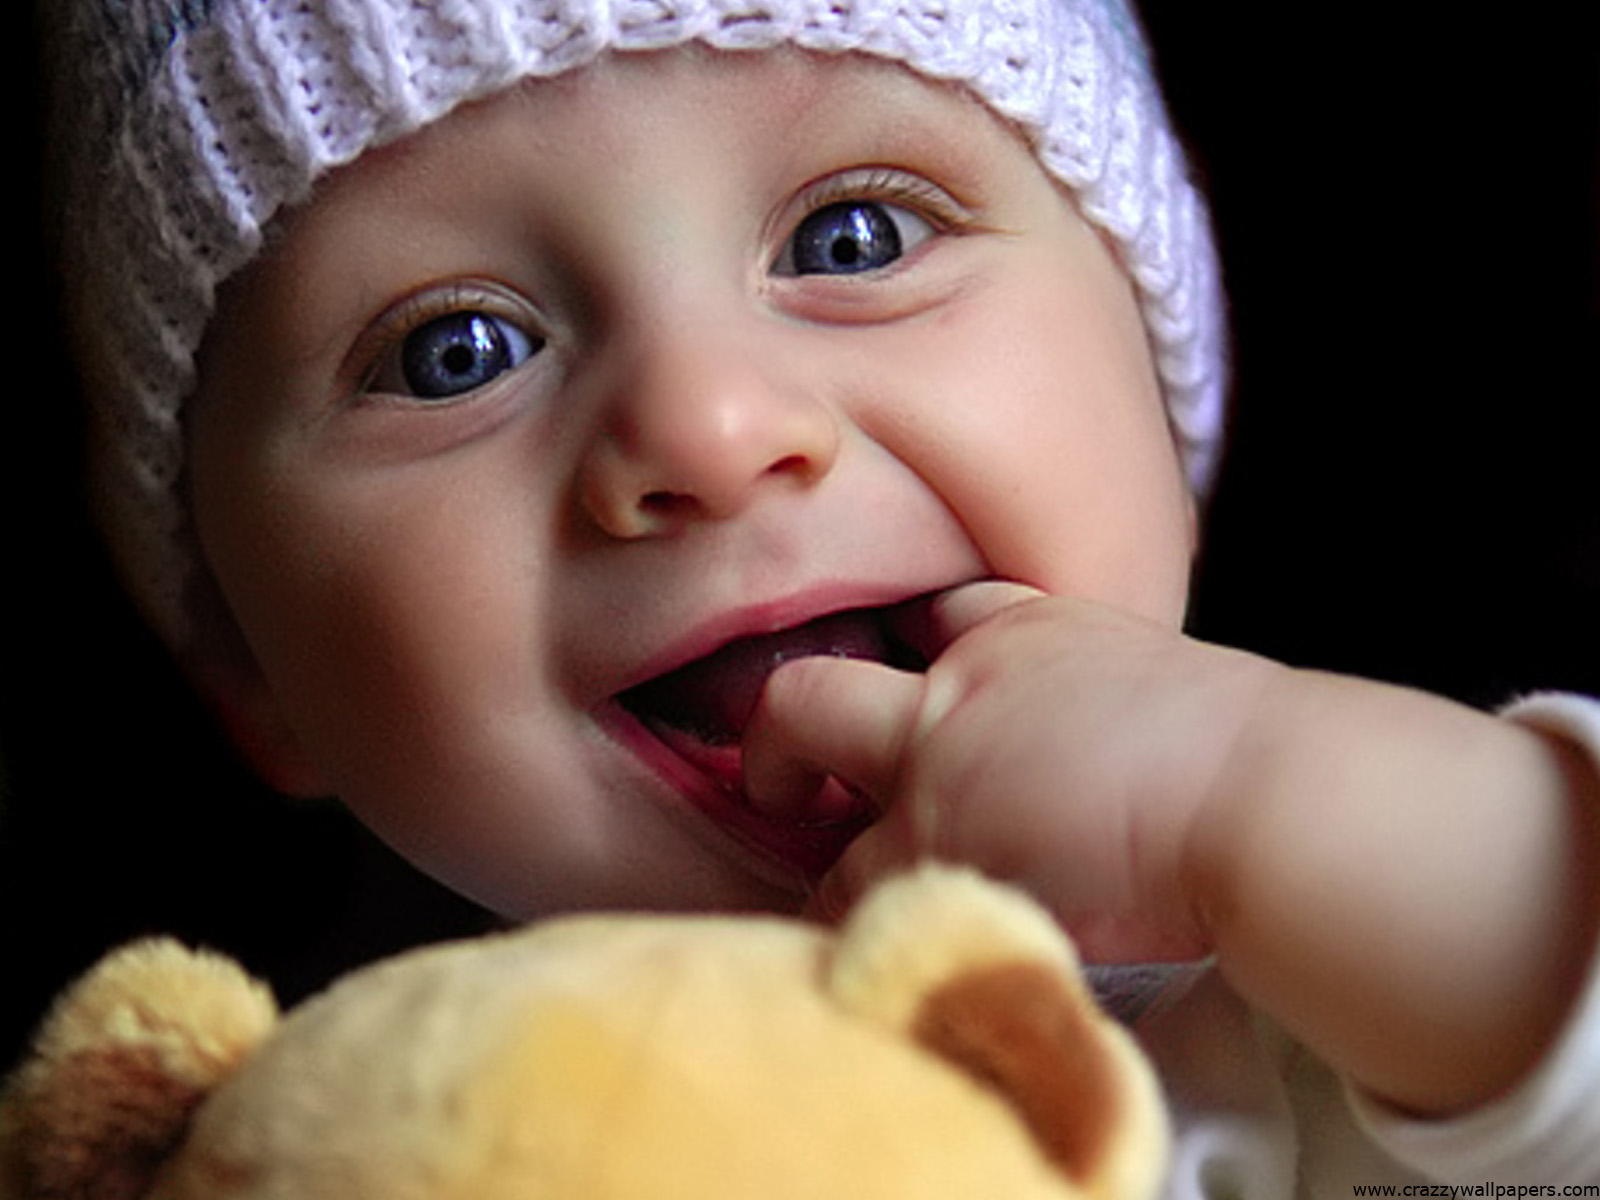 Cute baby playing doll Wallpapers HD Wallpapers